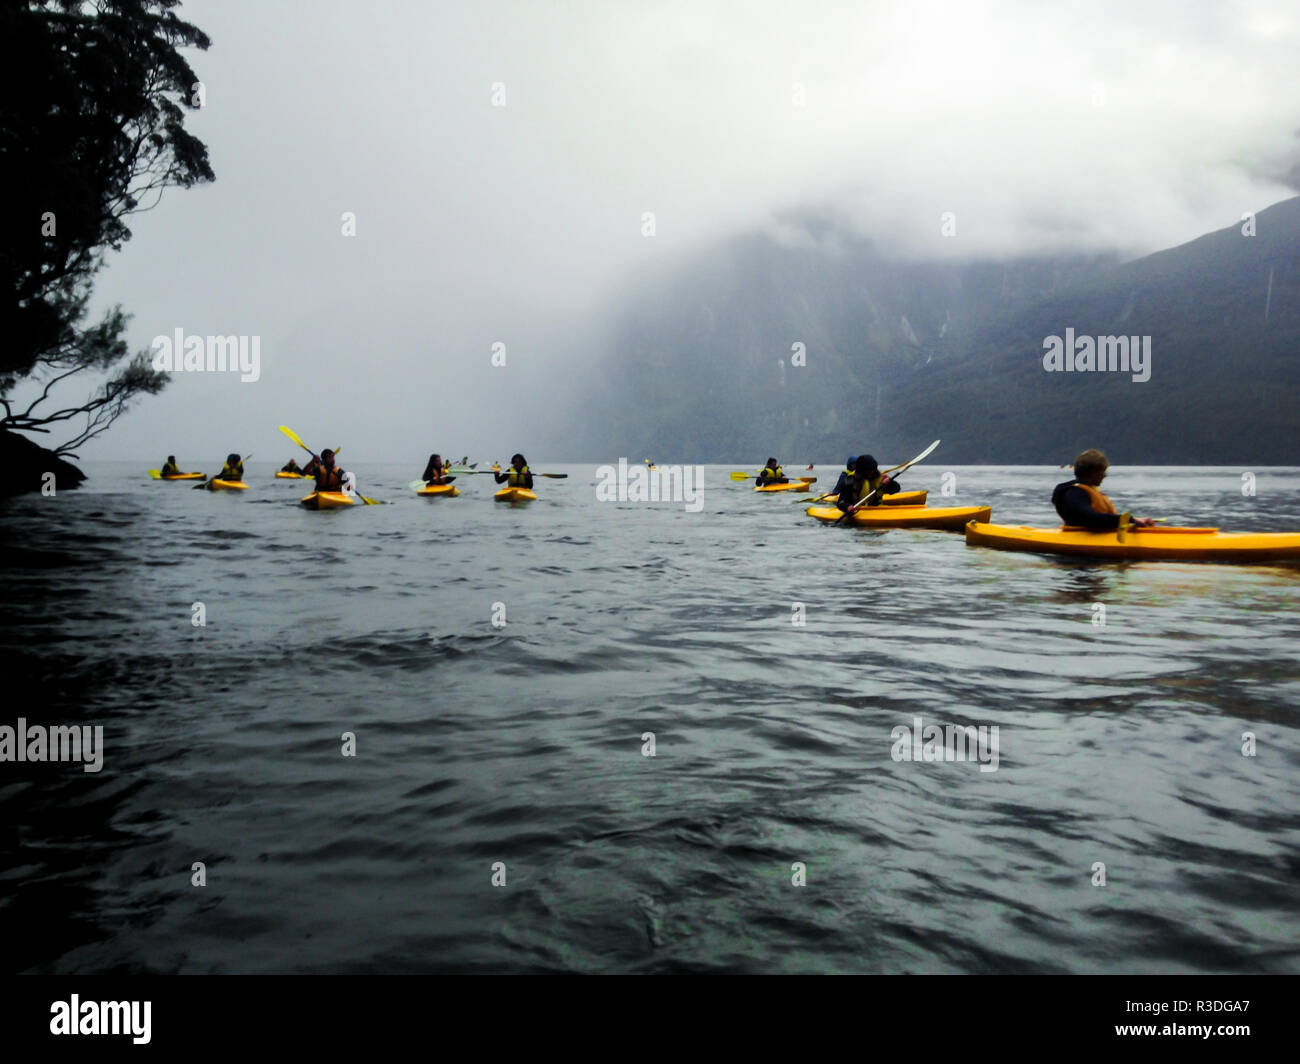 Several people paddling in yellow kayaks in Milford Sound, New Zealand Stock Photo